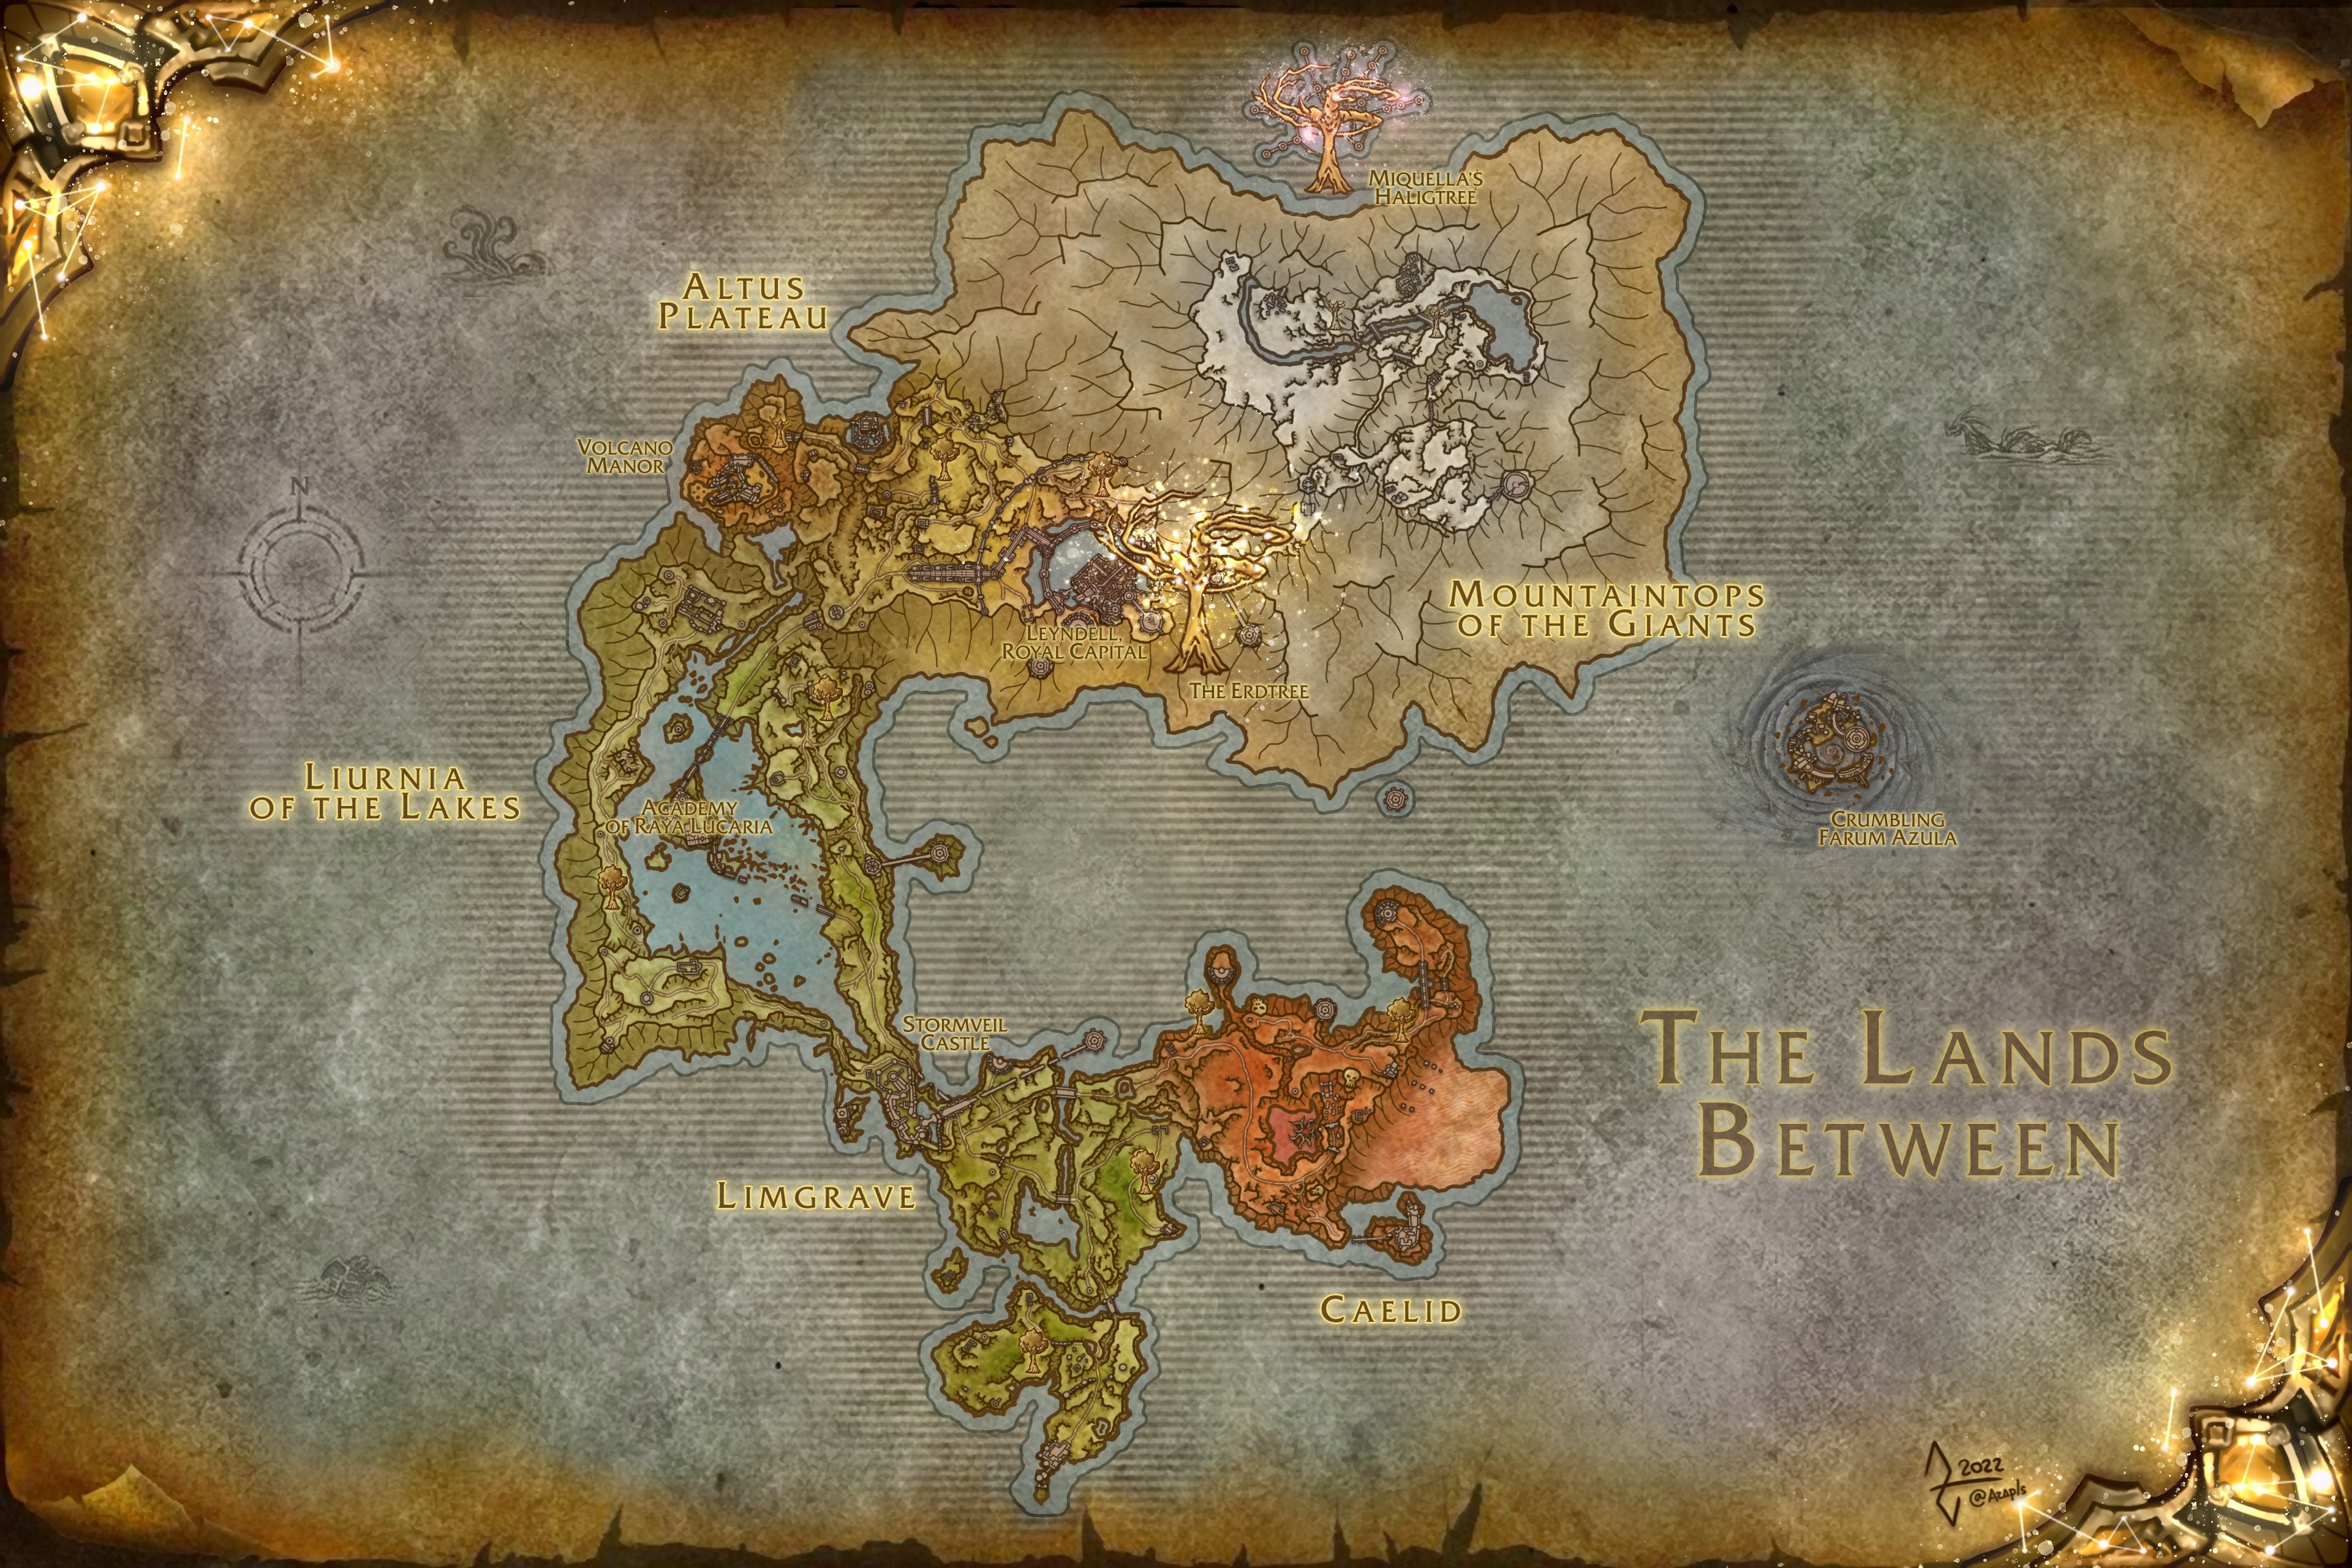 Elden Ring map in the style of Azeroth